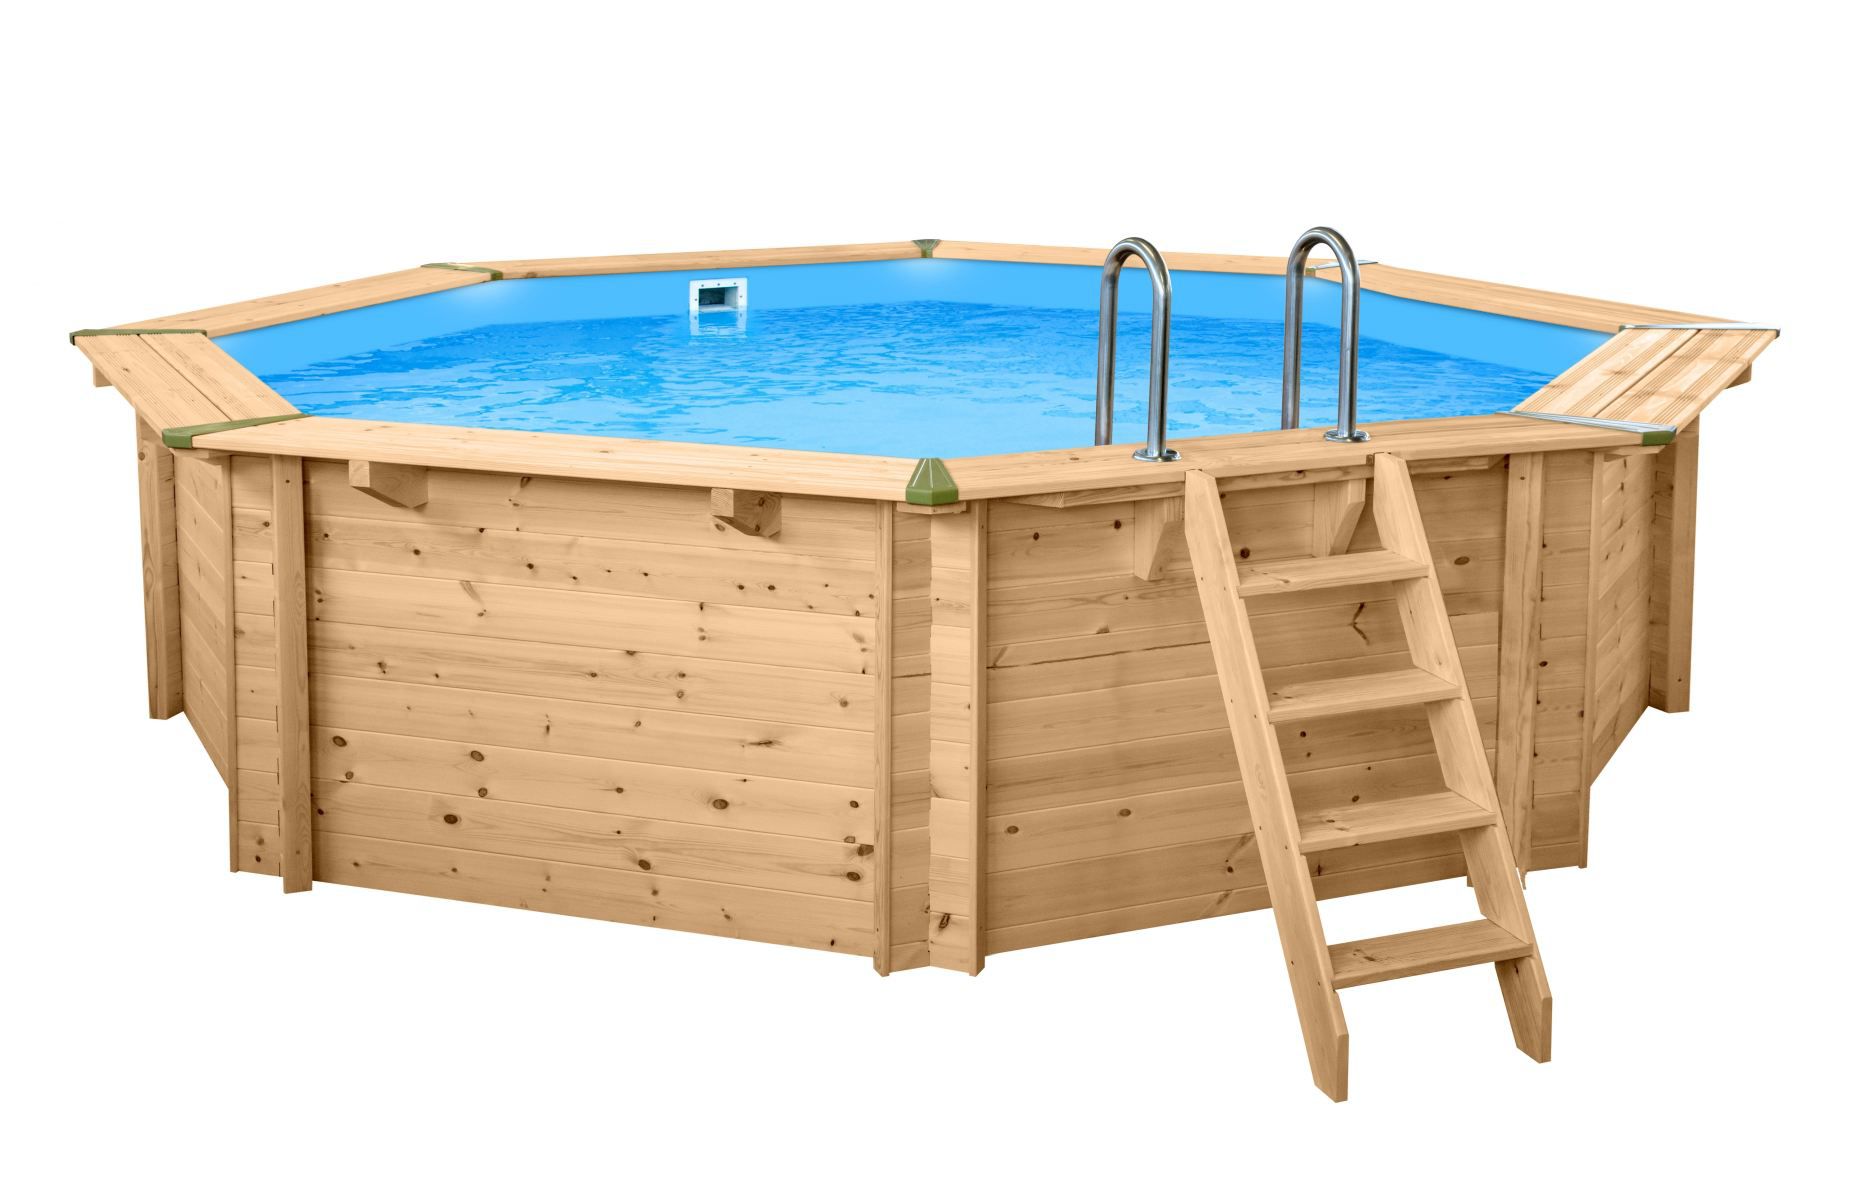 Sunnydream 04 pine wood pool, natural, 5.30 x 1.36 meters, including premium filter system, filter medium, pool ladder, pool liner, floor and wall fleece, stainless steel corner joints